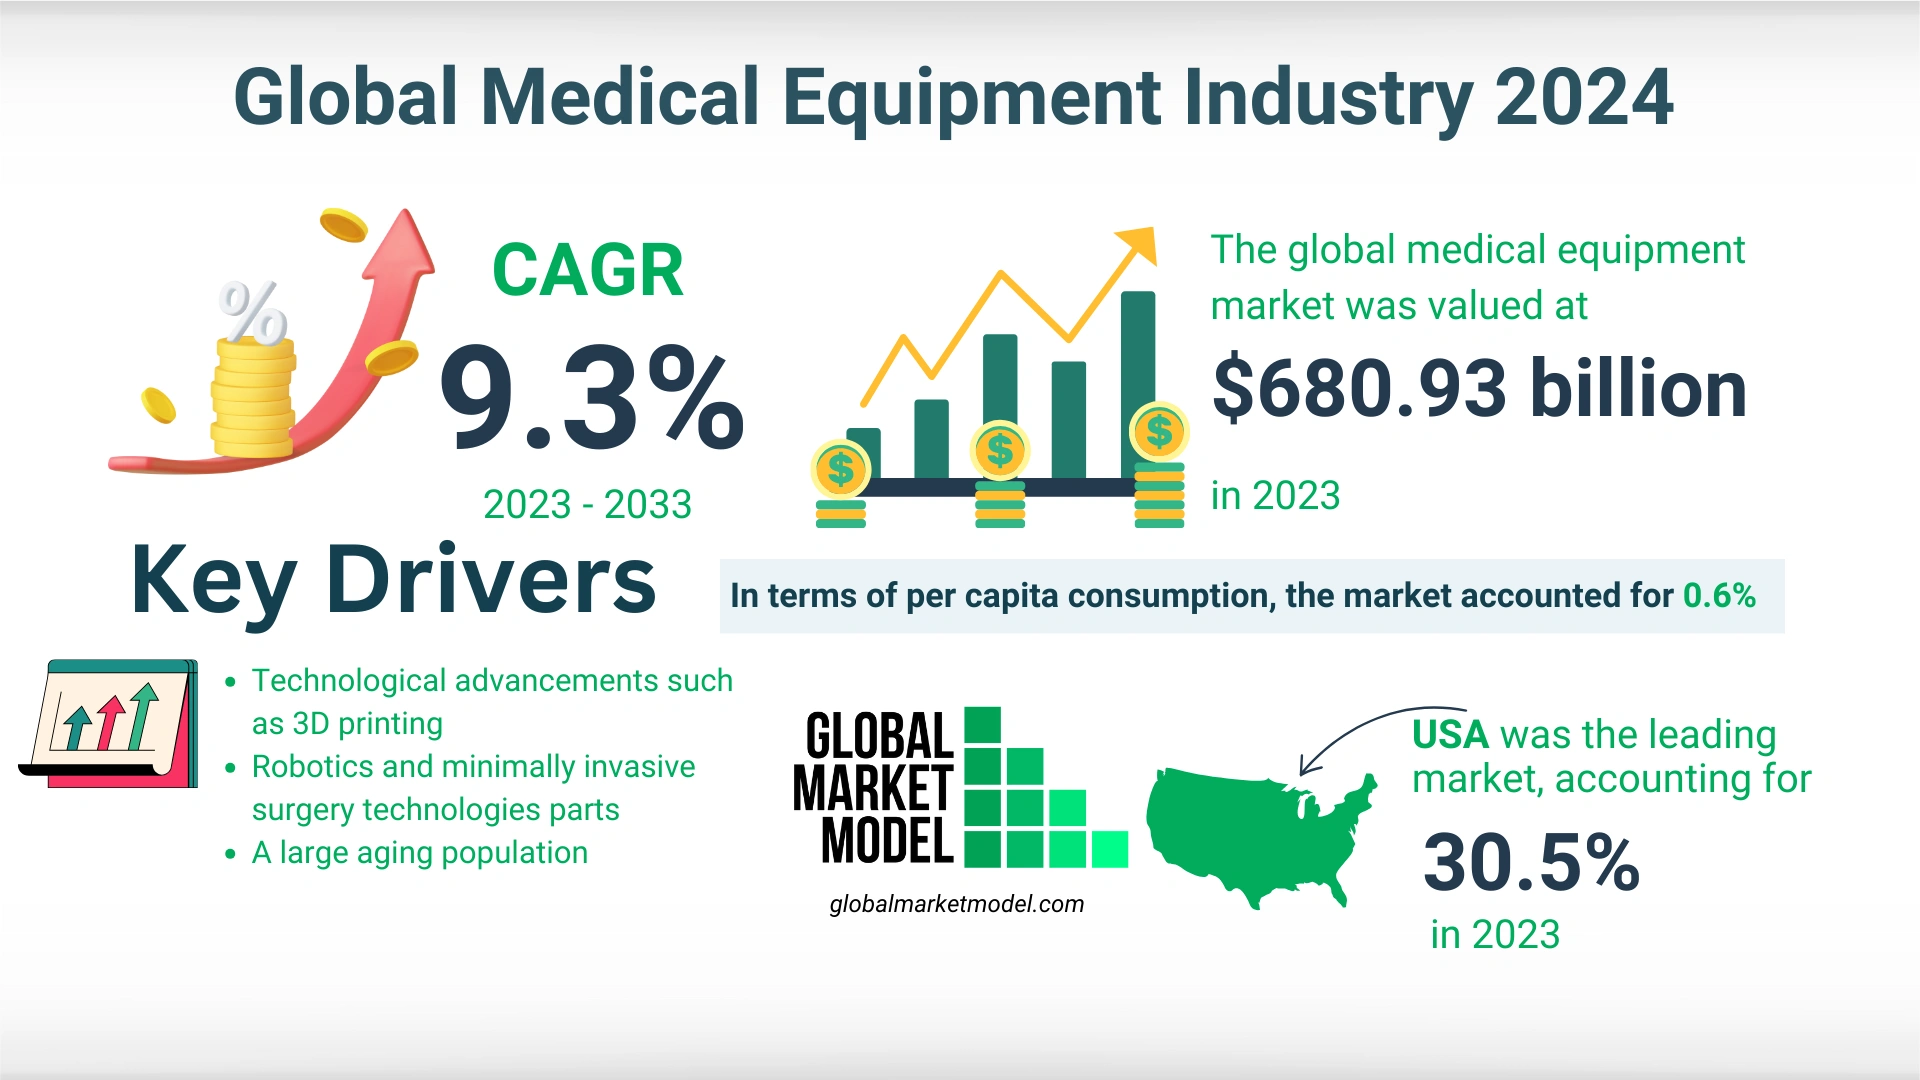  Medical Equipment Industry Overview 2024